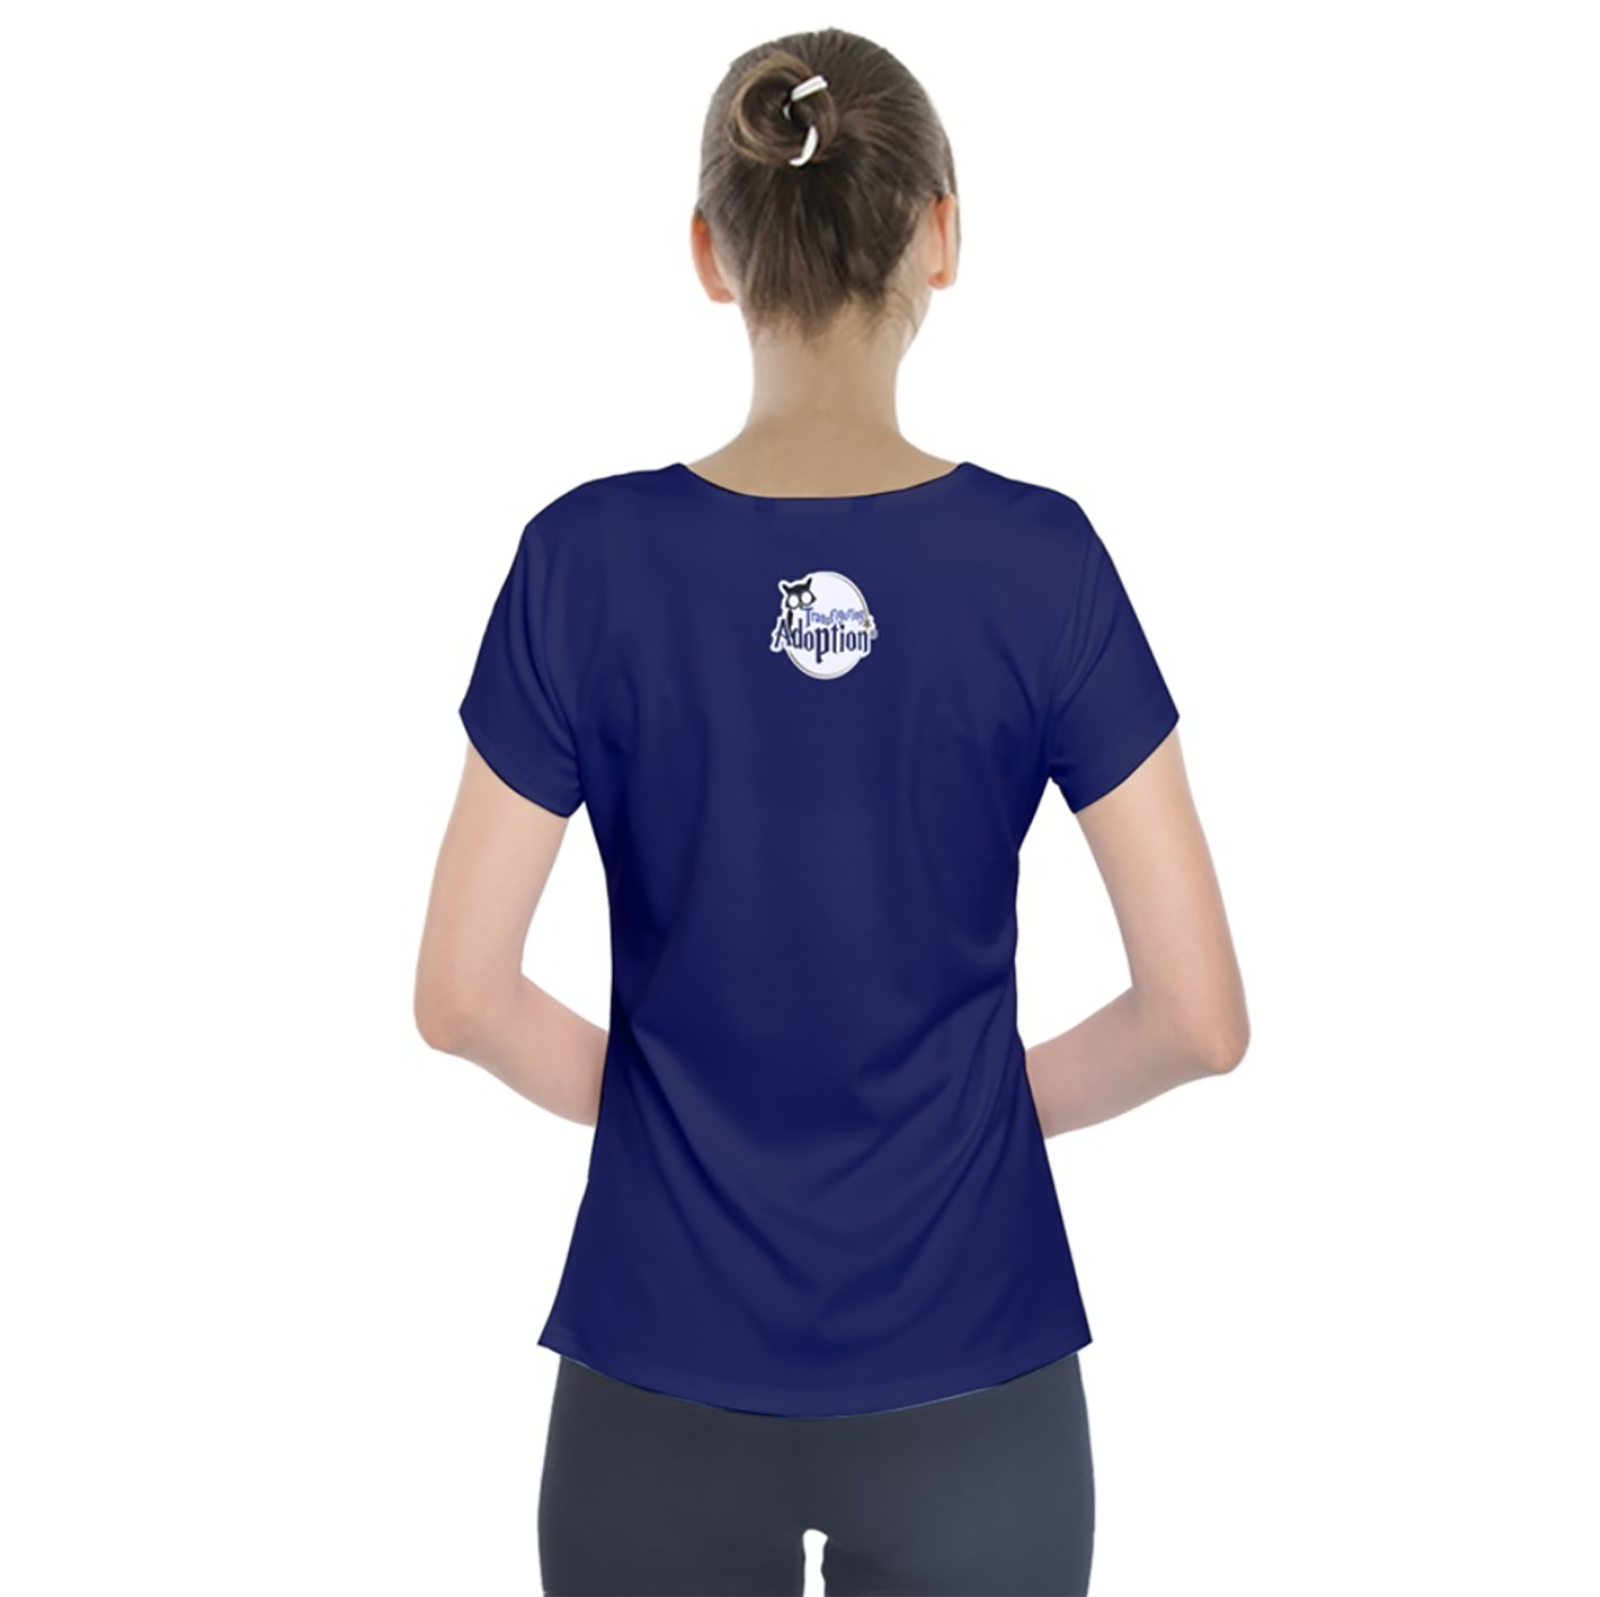 Blue/gray Owl Short Sleeve Front Detail Top - Inspired by Ravenclaw